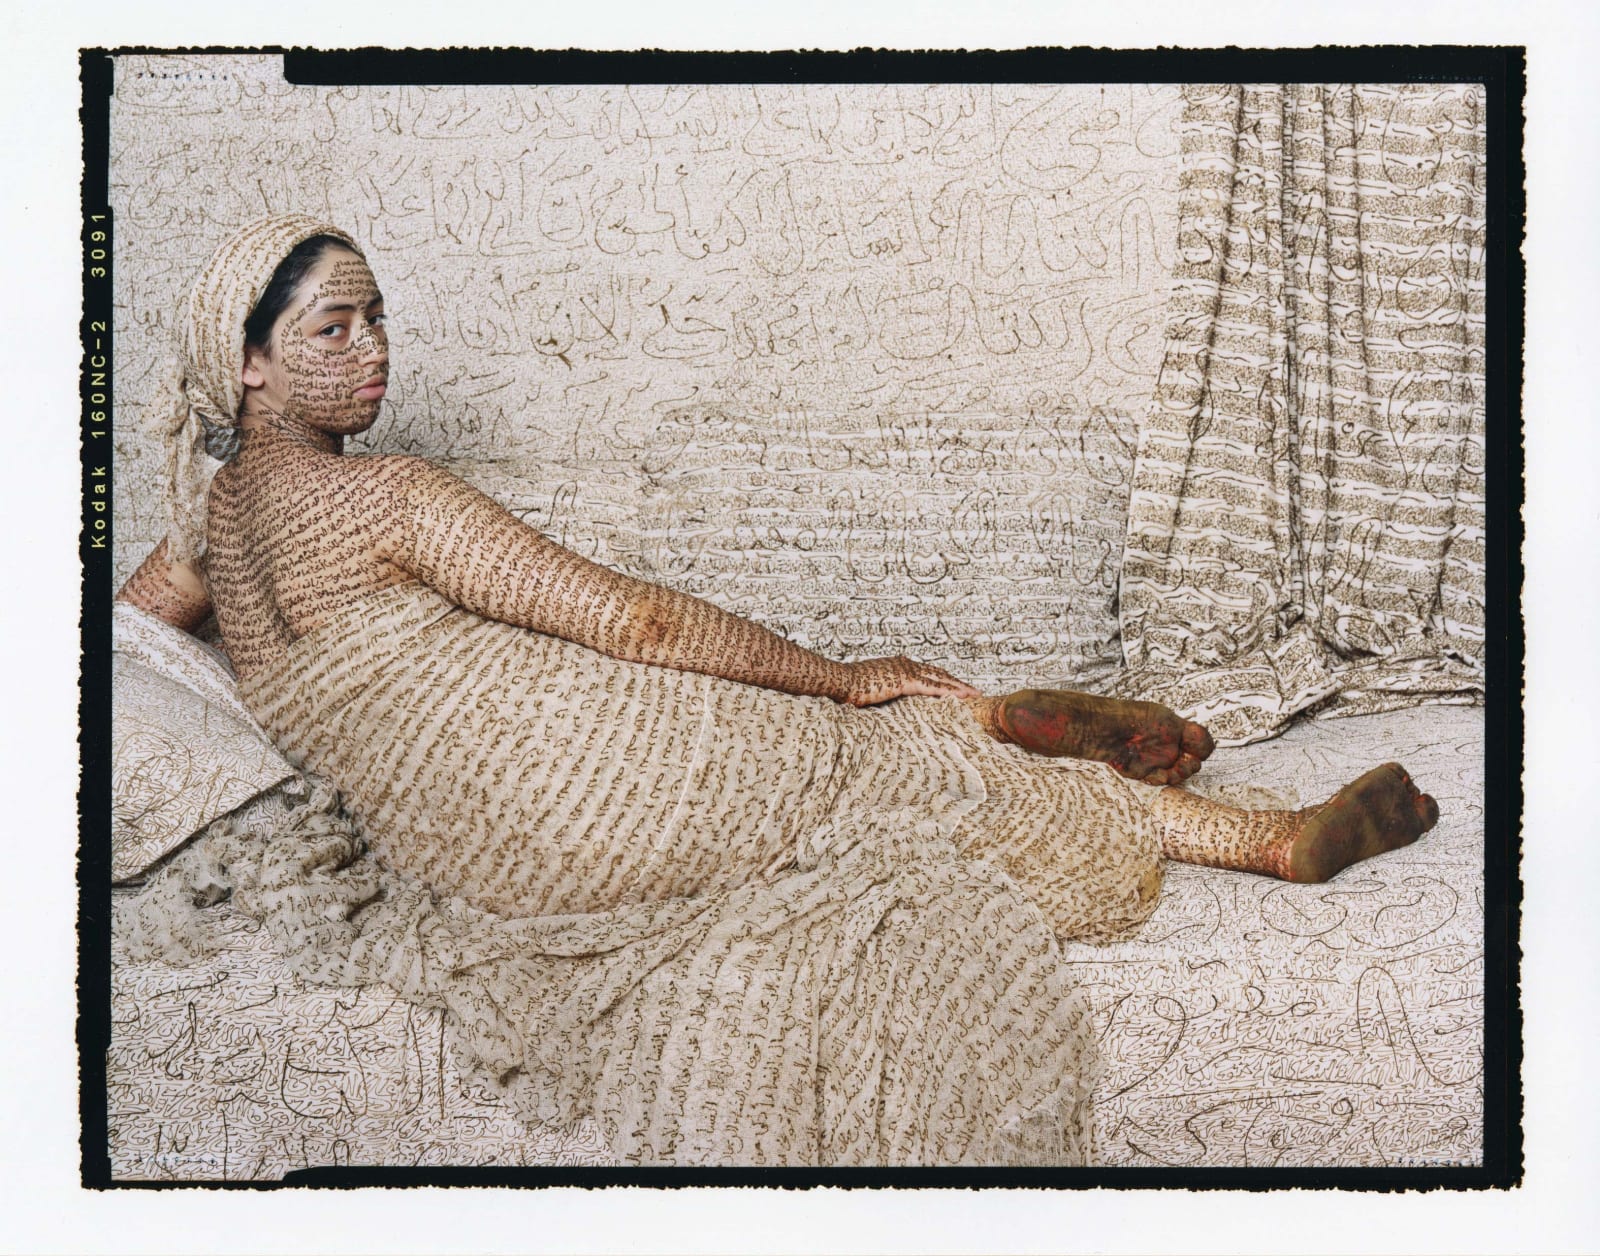 Lalla Essaydi Les Femmes du Maroc, woman posing to imitate subject in Jean Auguste Dominique Ingres' painting La Grande Odalisque, her skin and all fabric inscribed with Arabic calligraphy in henna